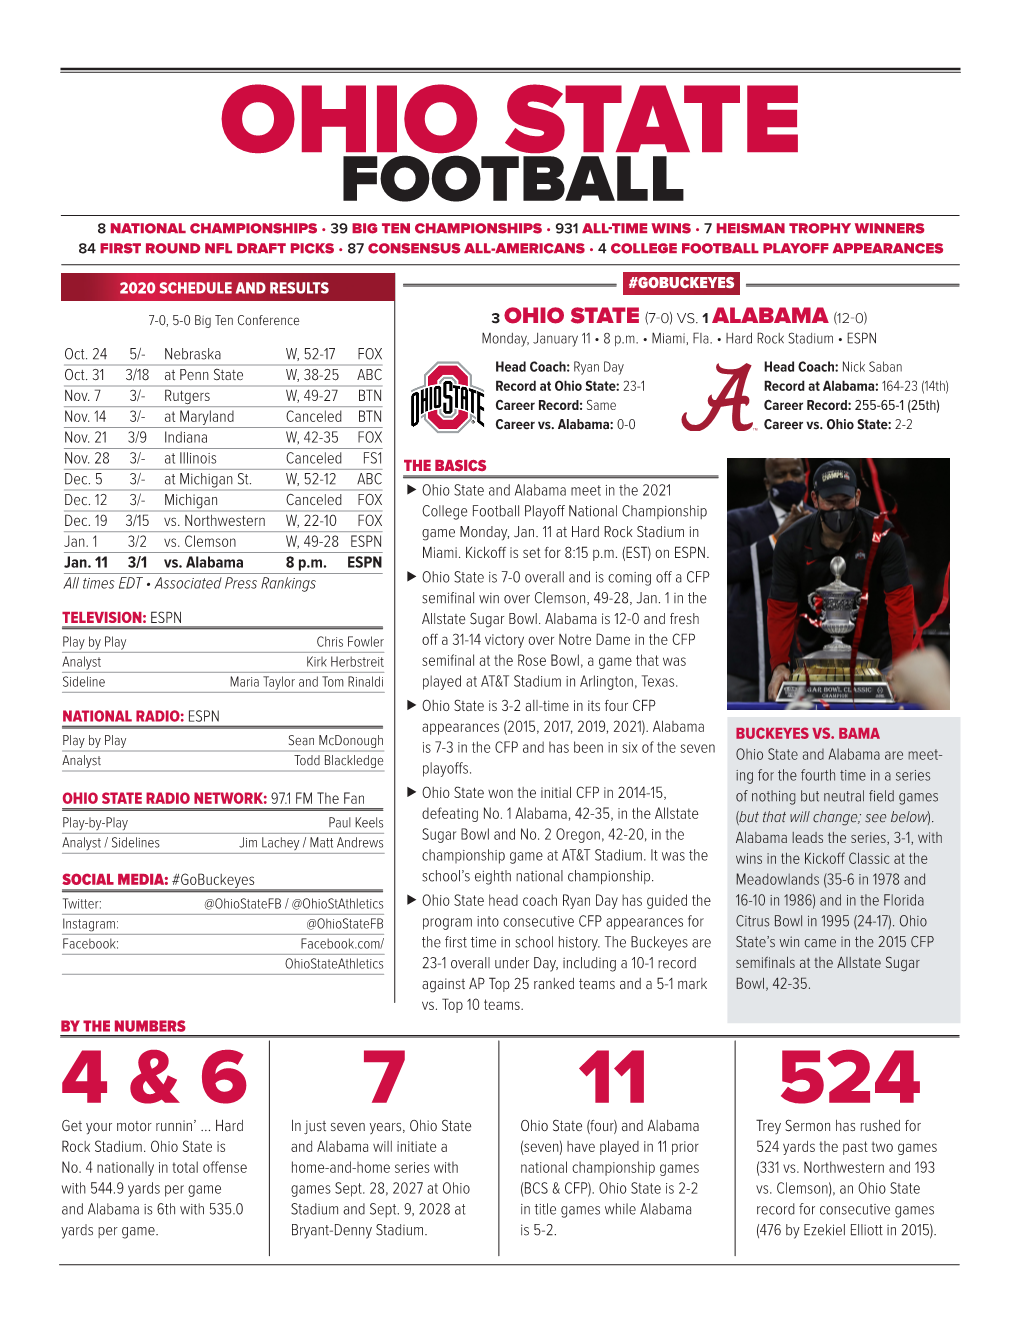 Ohio State Game Notes